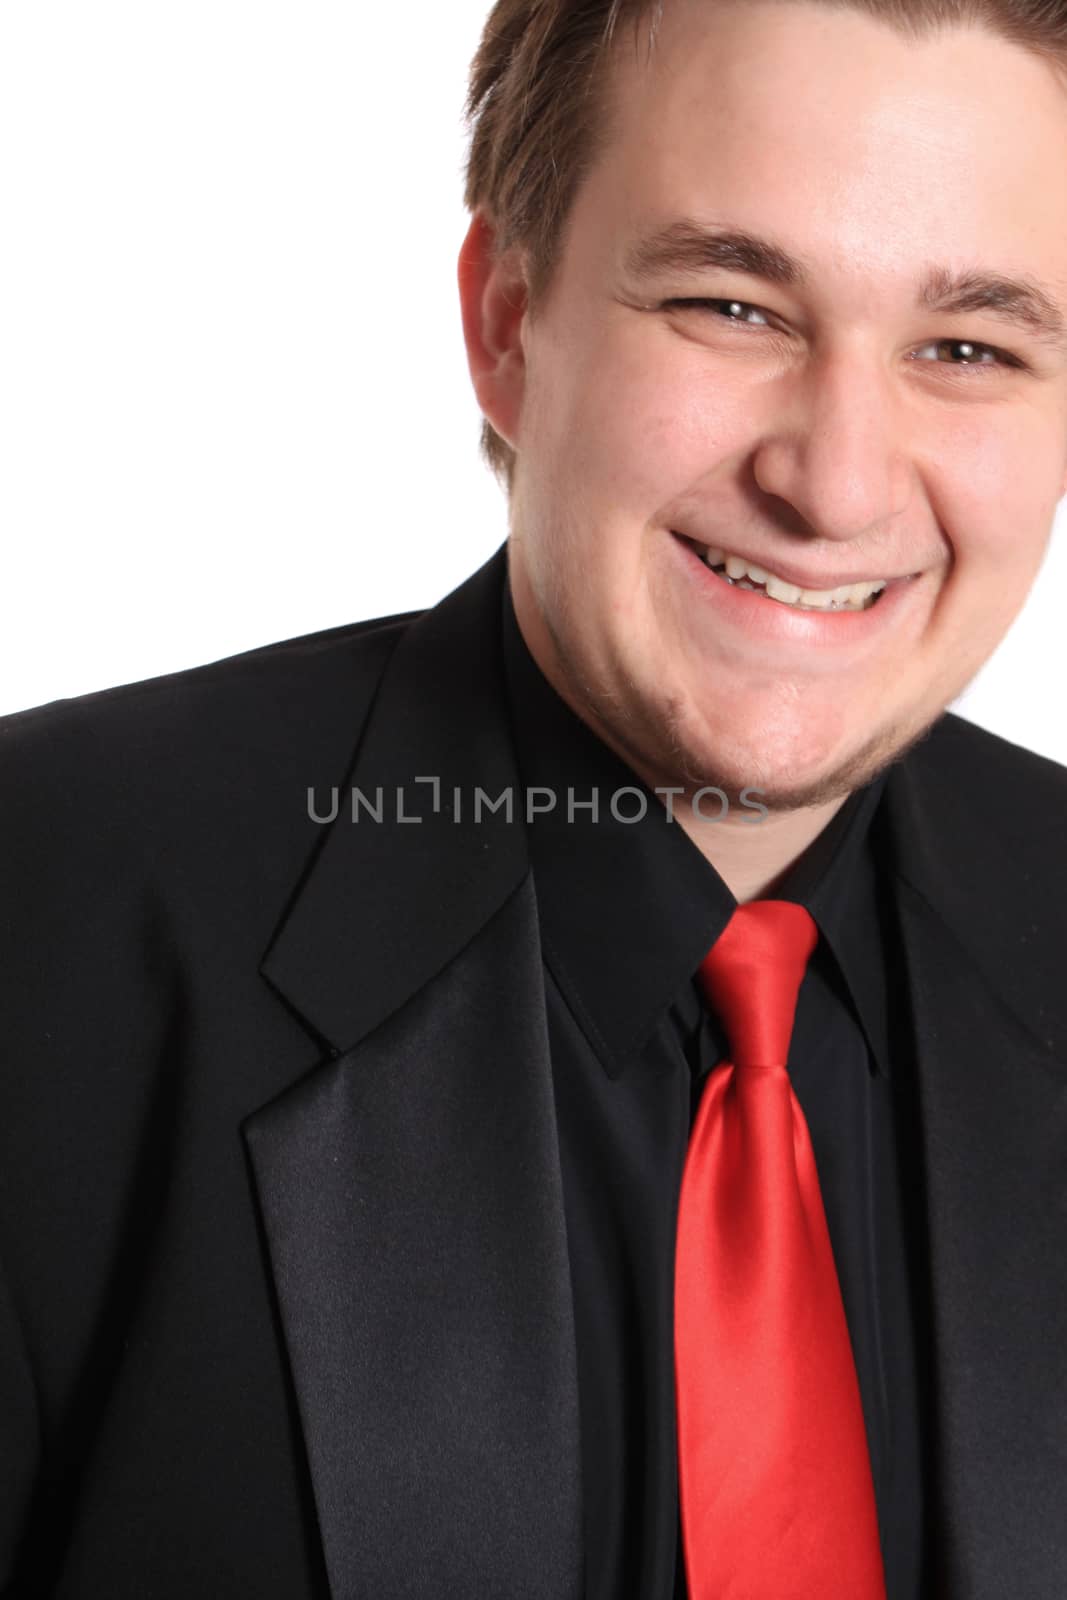 Handsome young businessman in black formal suit with red tie, smiling